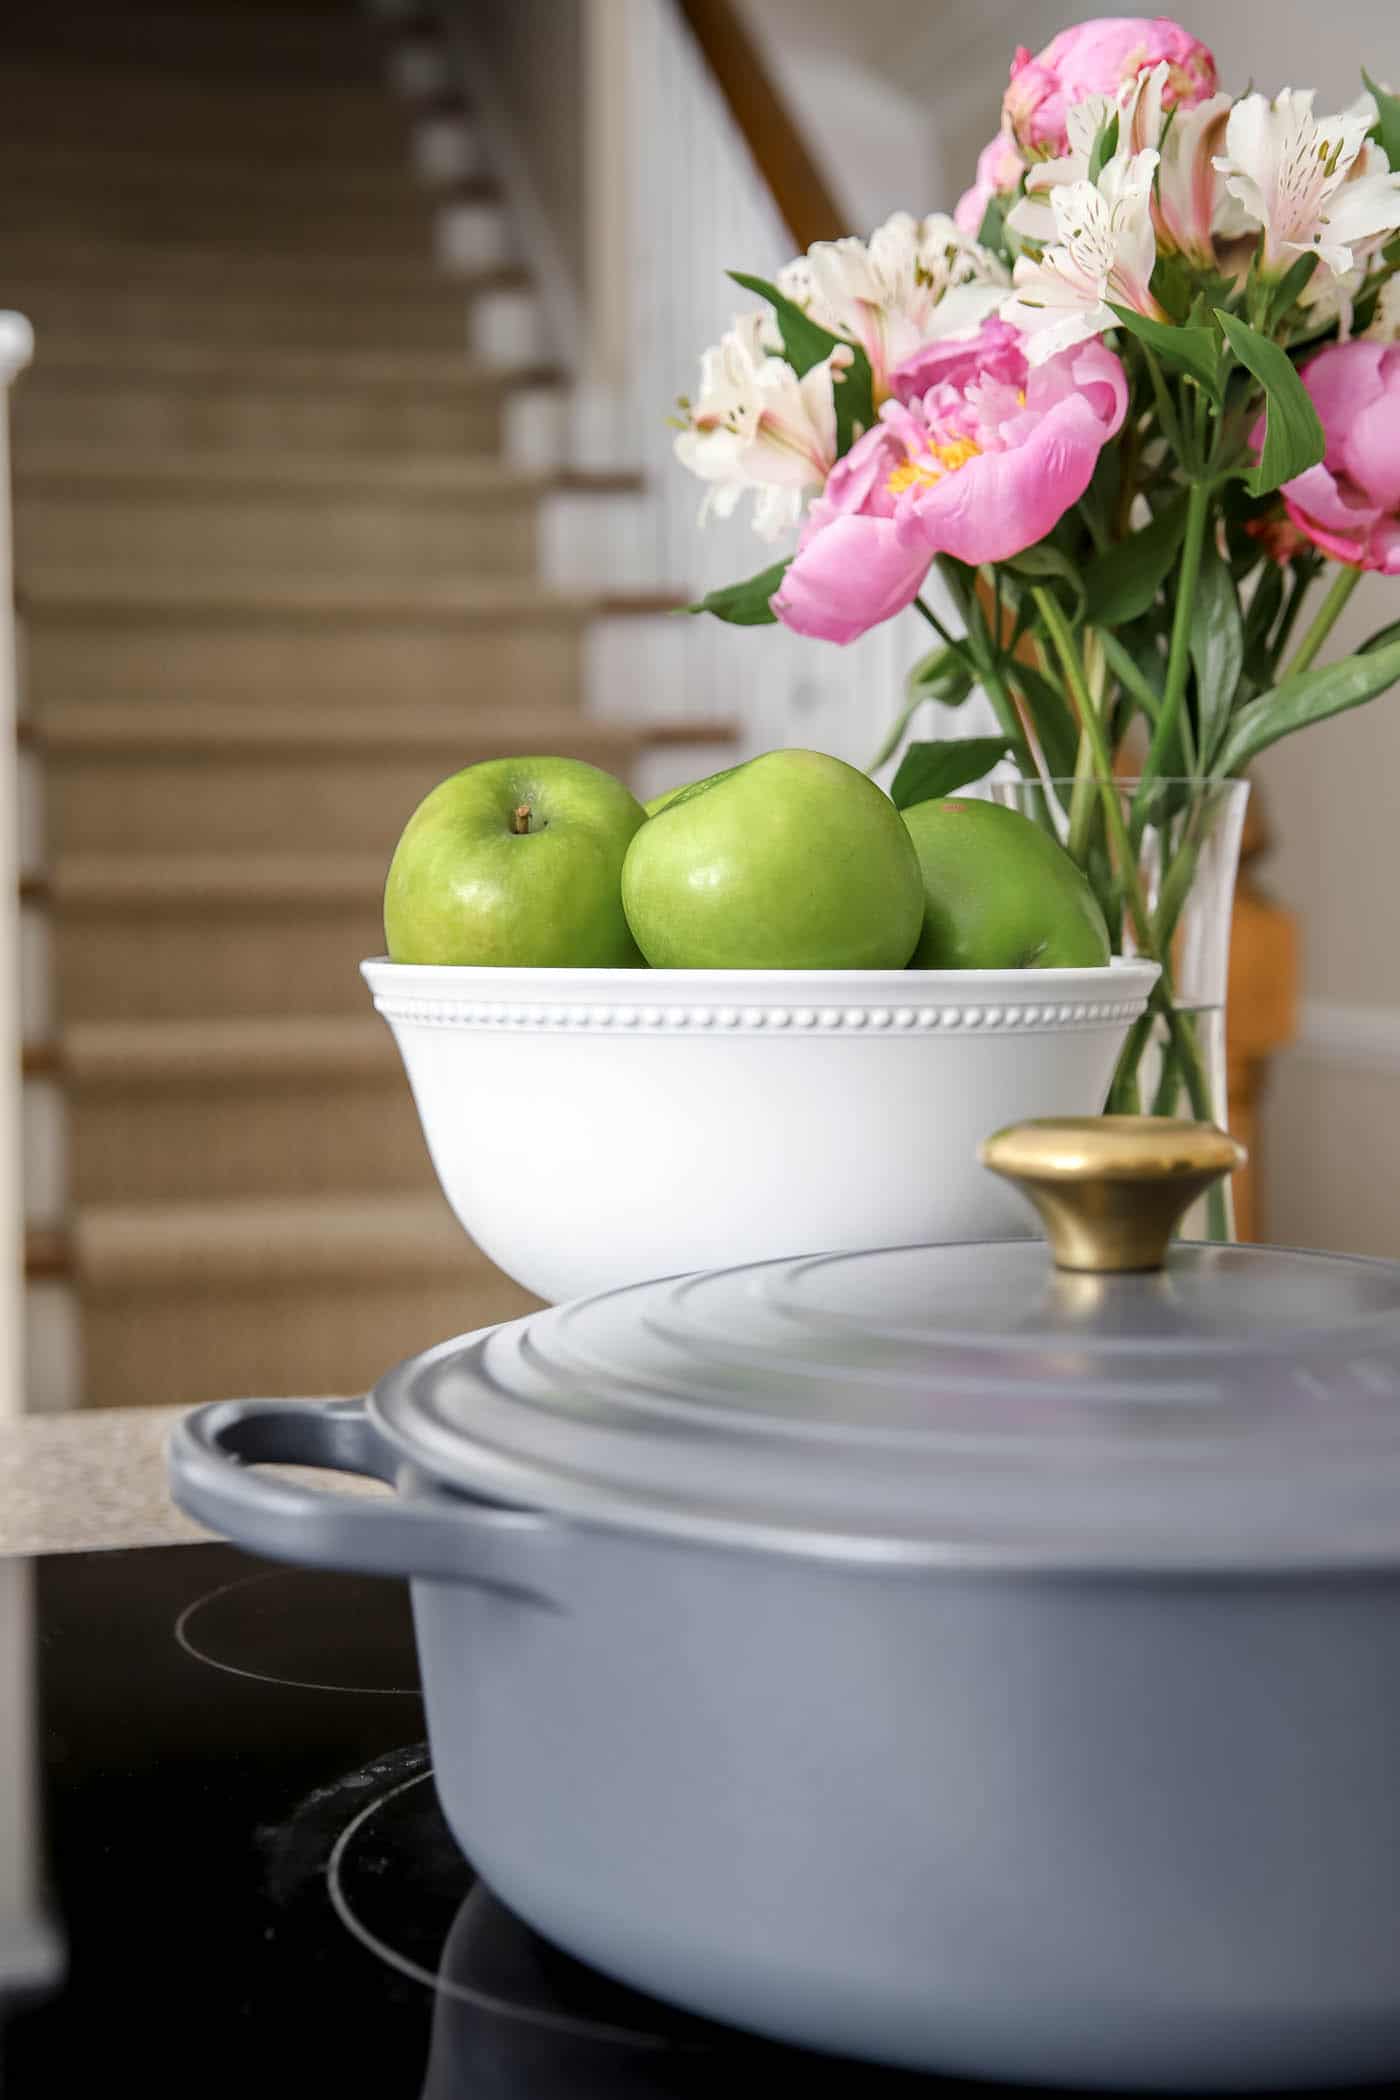 Large Dutch Oven and Fruit Bowl on Kitchen Island